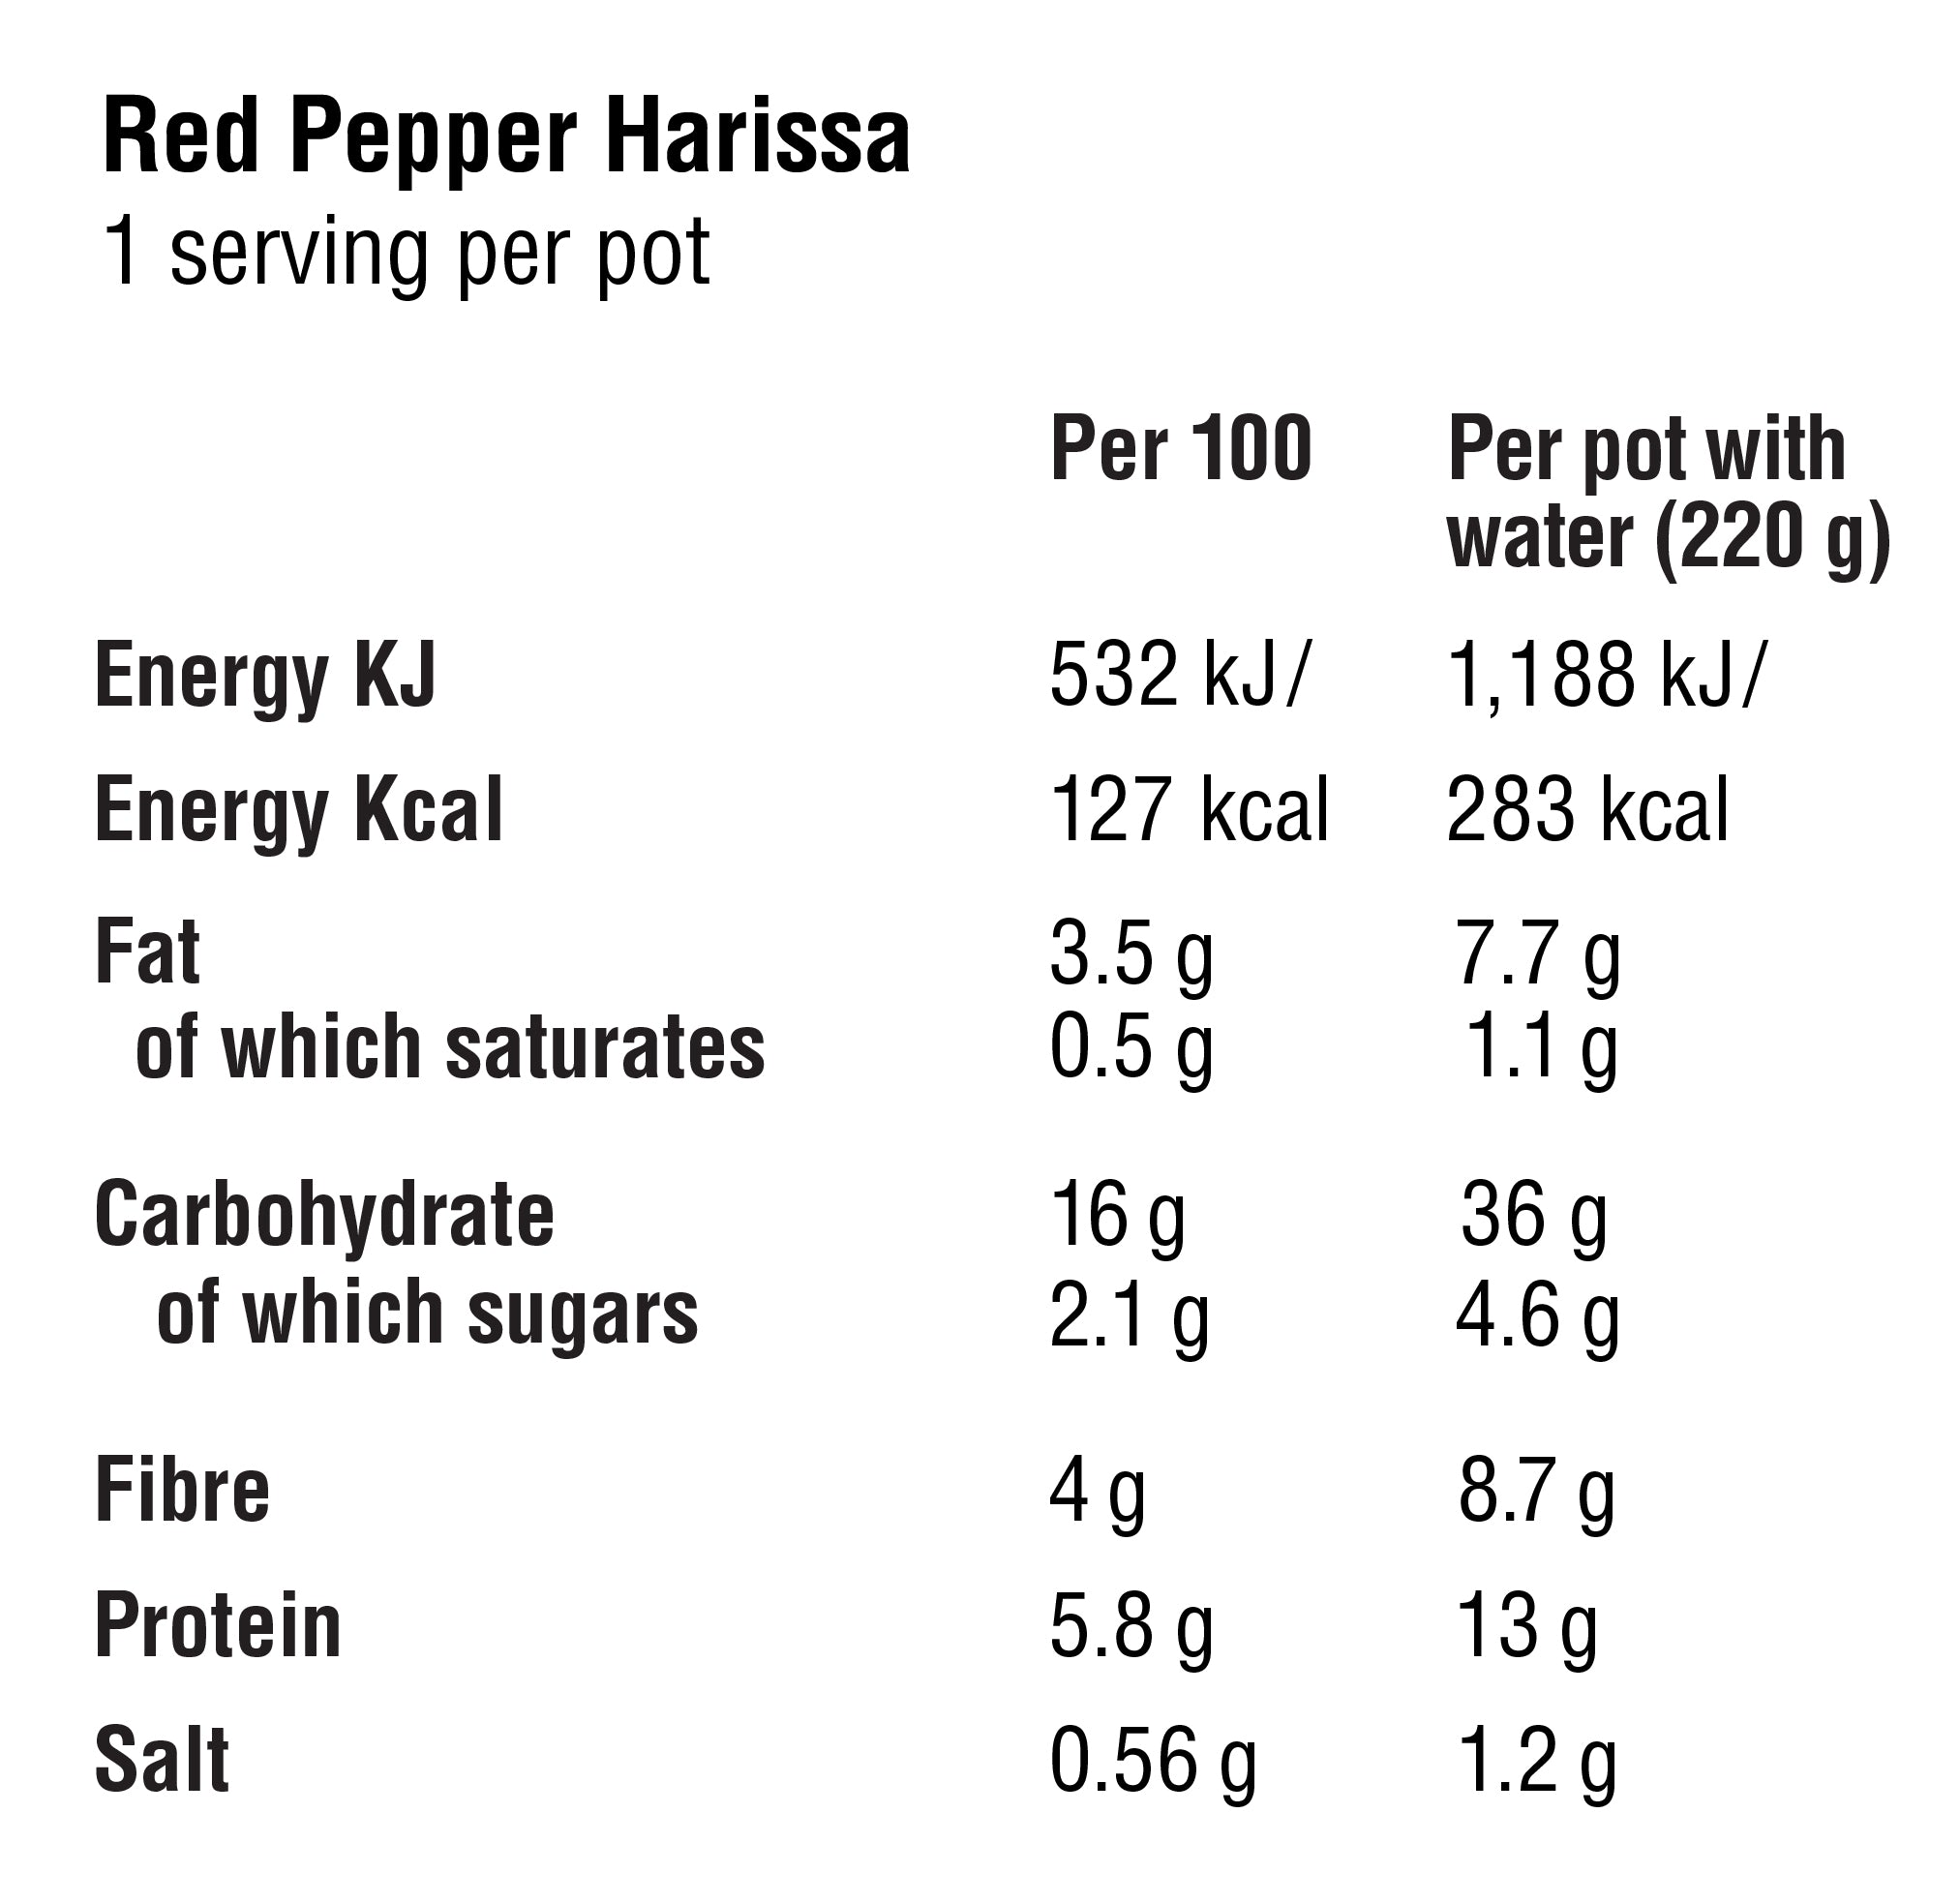 ZENB Red Pepper Harissa Agile Bowl Nutritional Facts